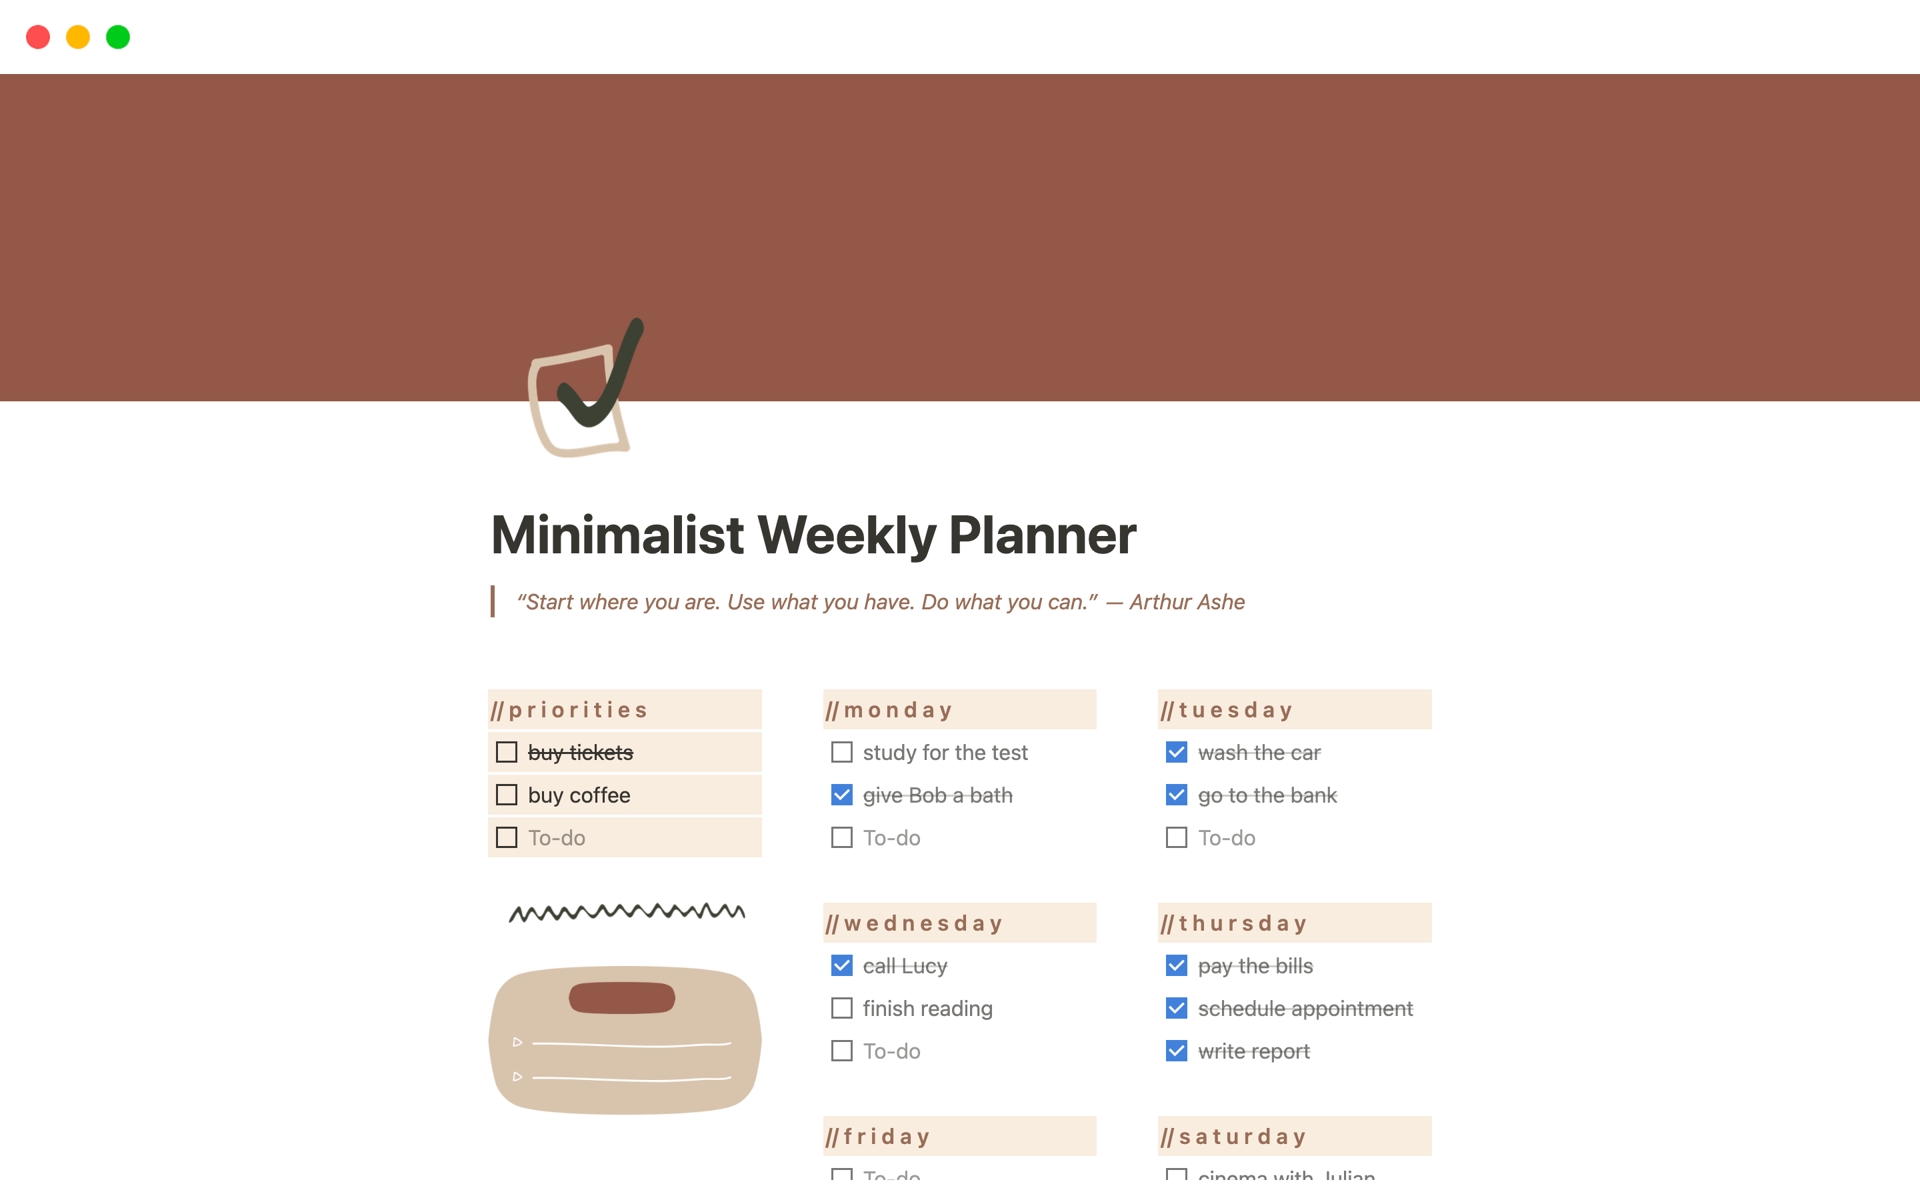 Minimalist template to organize weekly activities.